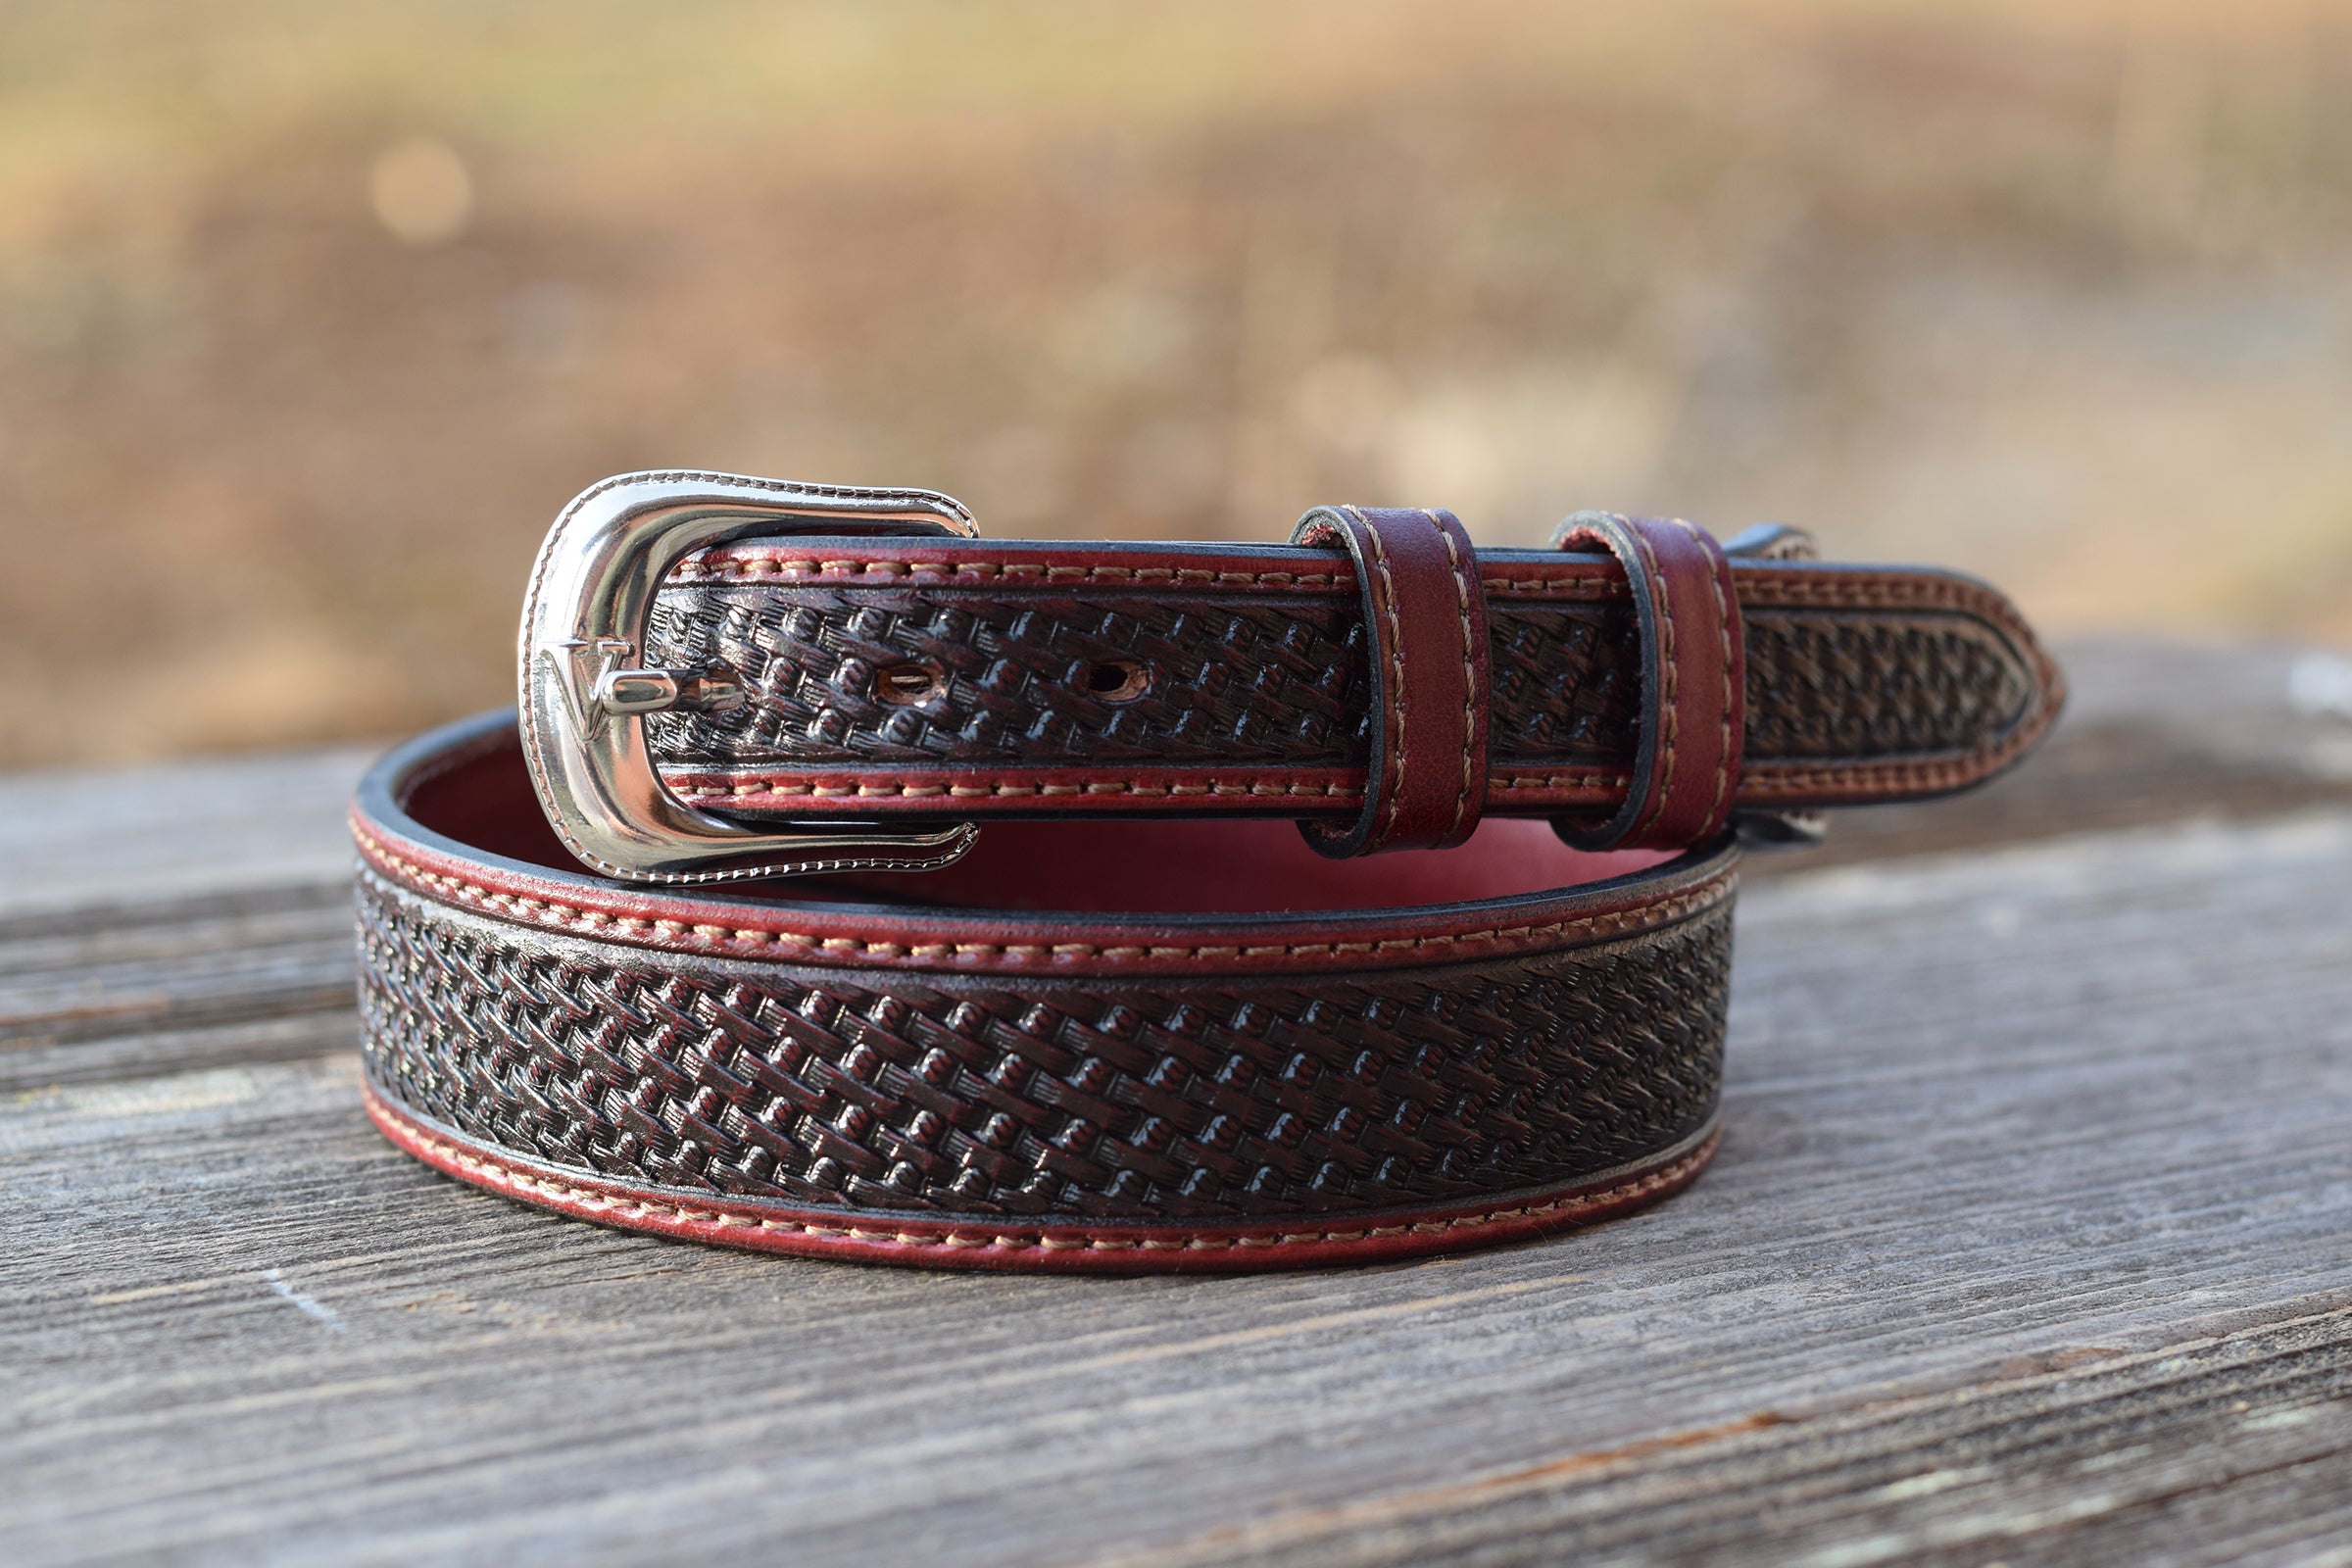 VINTAGE BRAIDED LEATHER Belt,brown Leather Belt,braided Leather Belt Womens,vintage  Small Braided Leather Belt,vintage Small Brown Belt,belt -  Canada